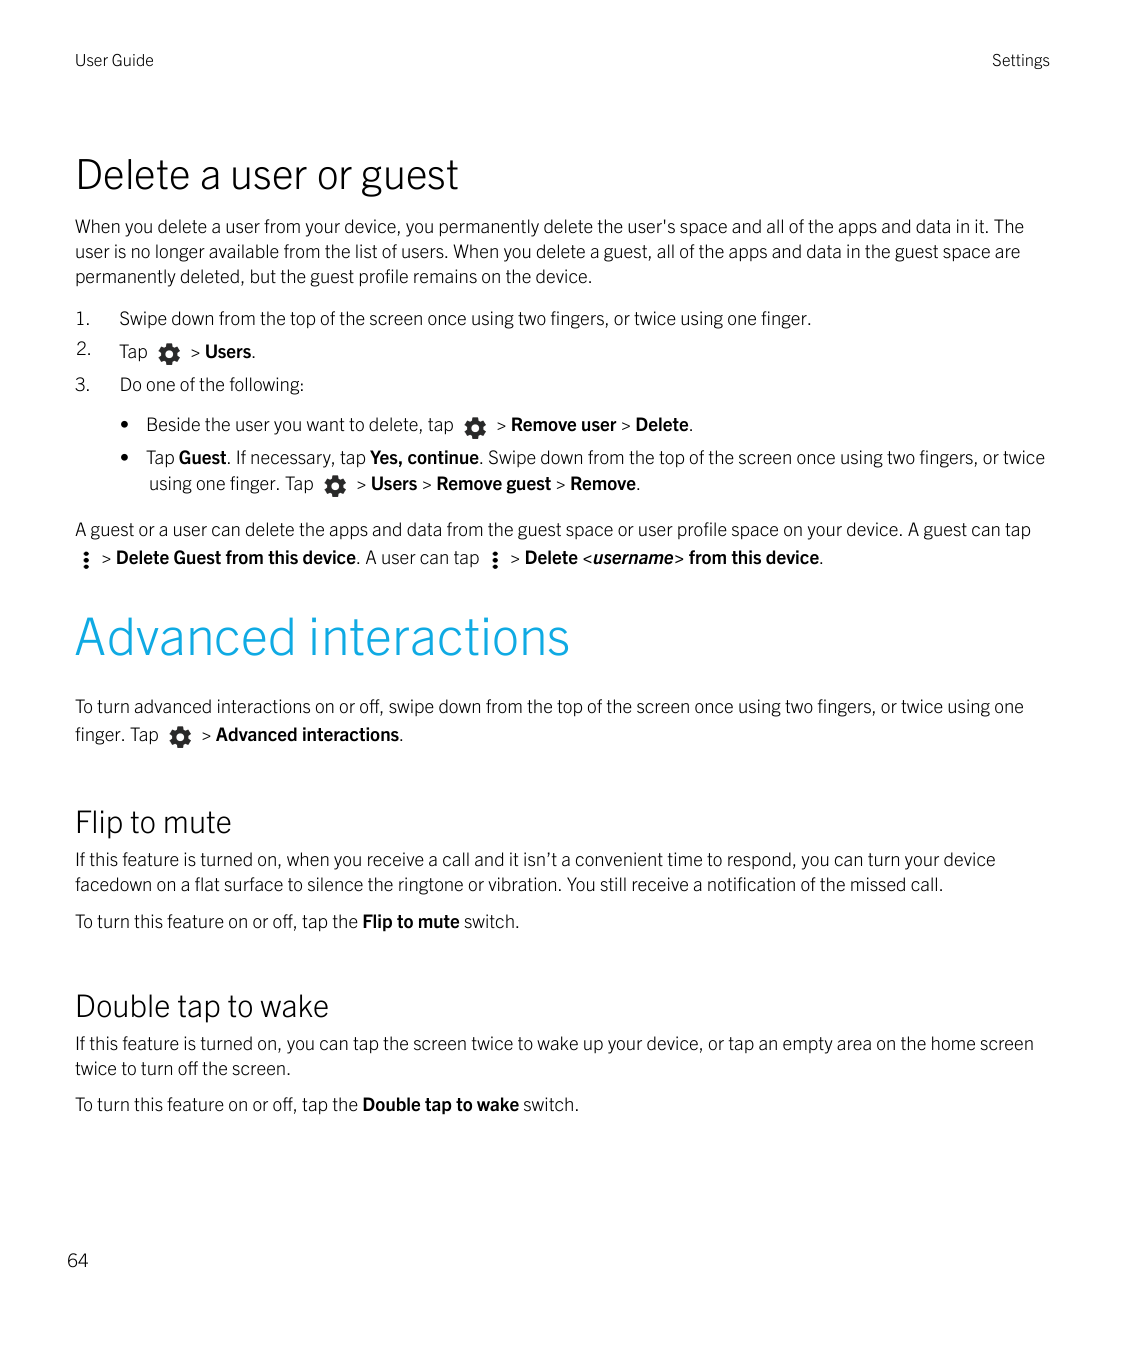 User GuideSettingsDelete a user or guestWhen you delete a user from your device, you permanently delete the user's space and all